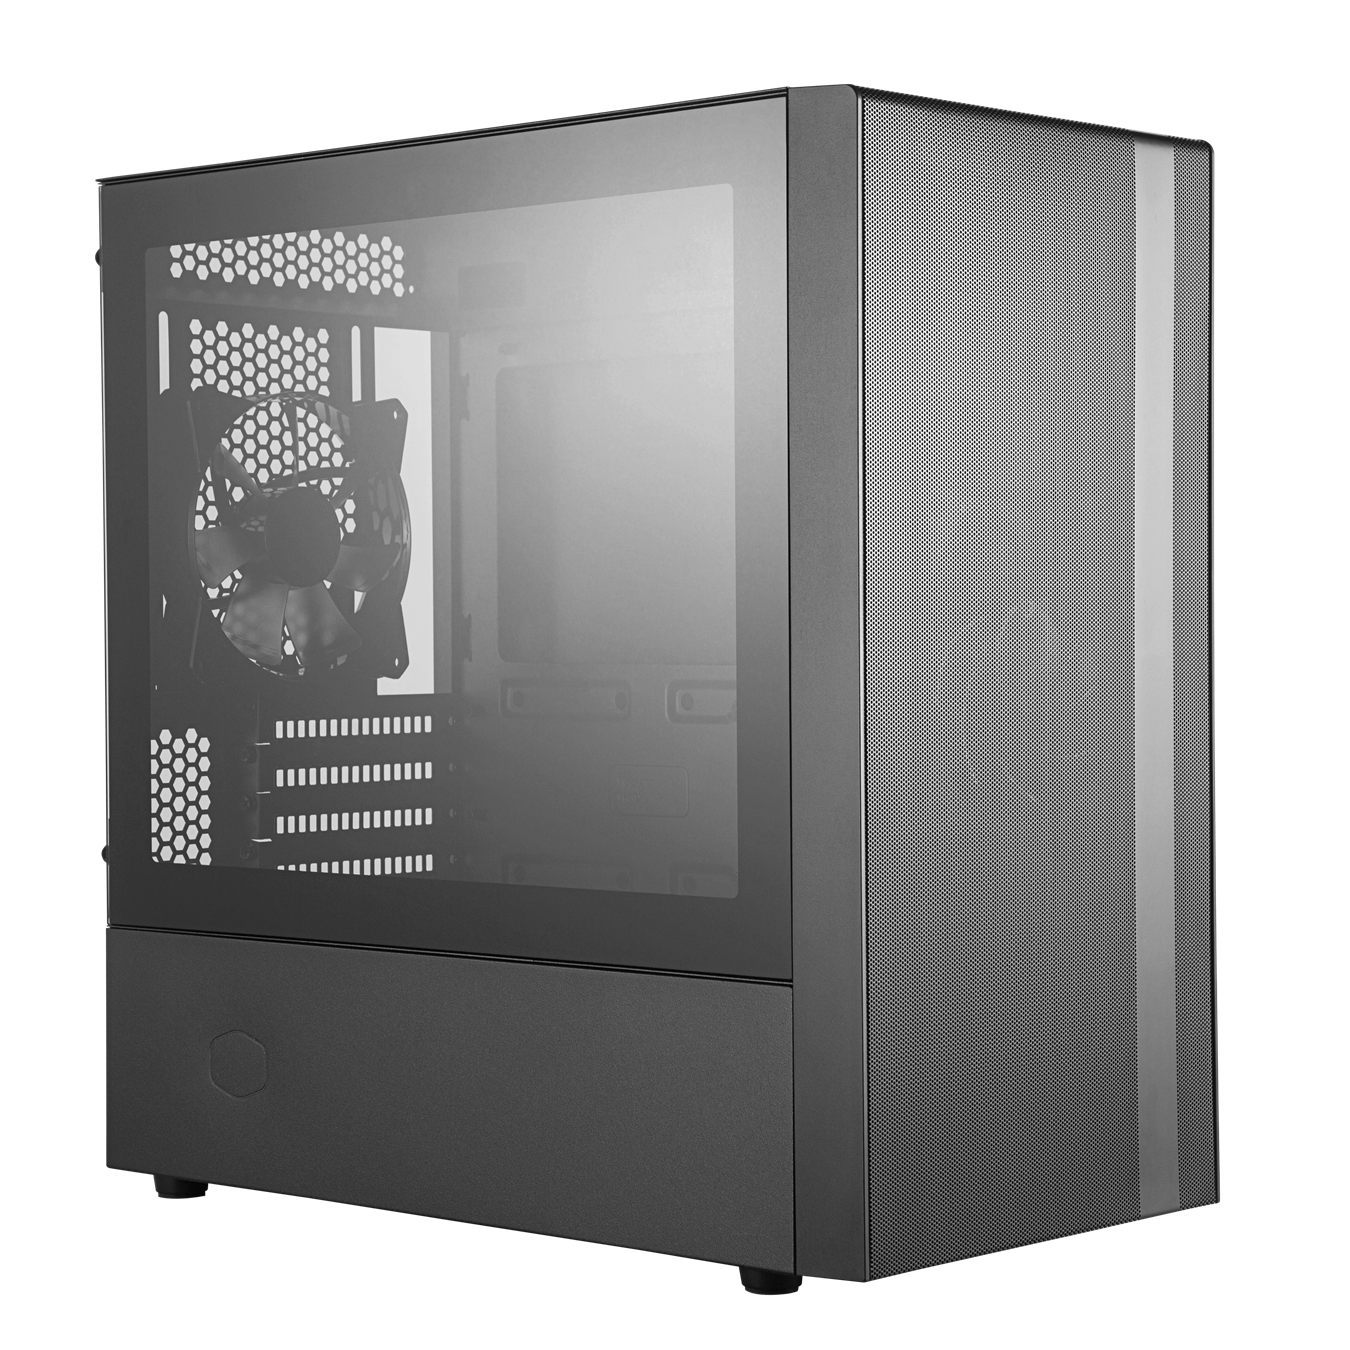 Cooler Master MasterBox NR400 | Tower mATX Tempered Glass Case